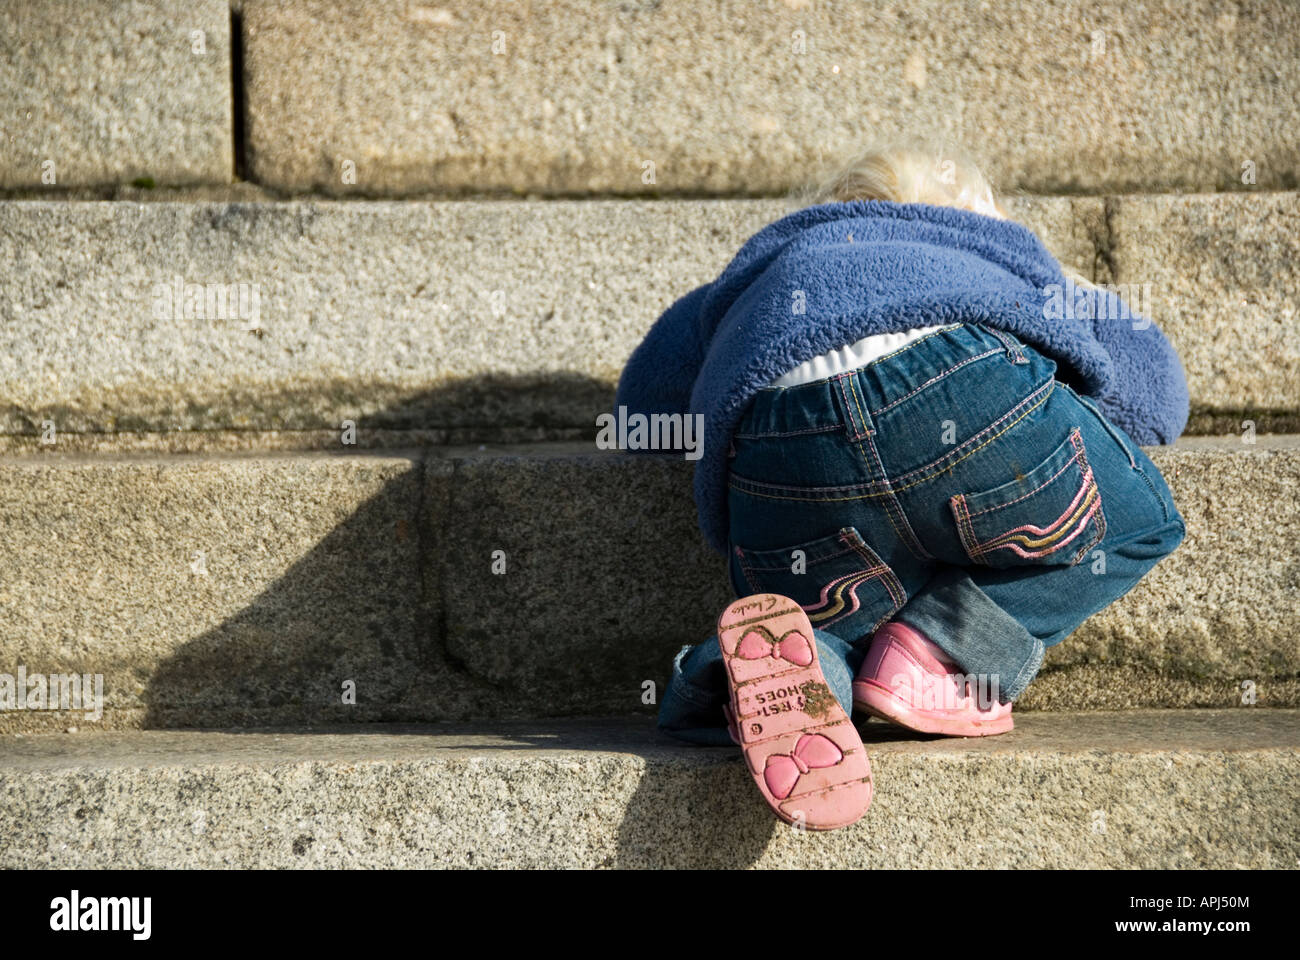 Stock Photo of a two year old toddler climbing very carefullu backwards down a row of steps Stock Photo